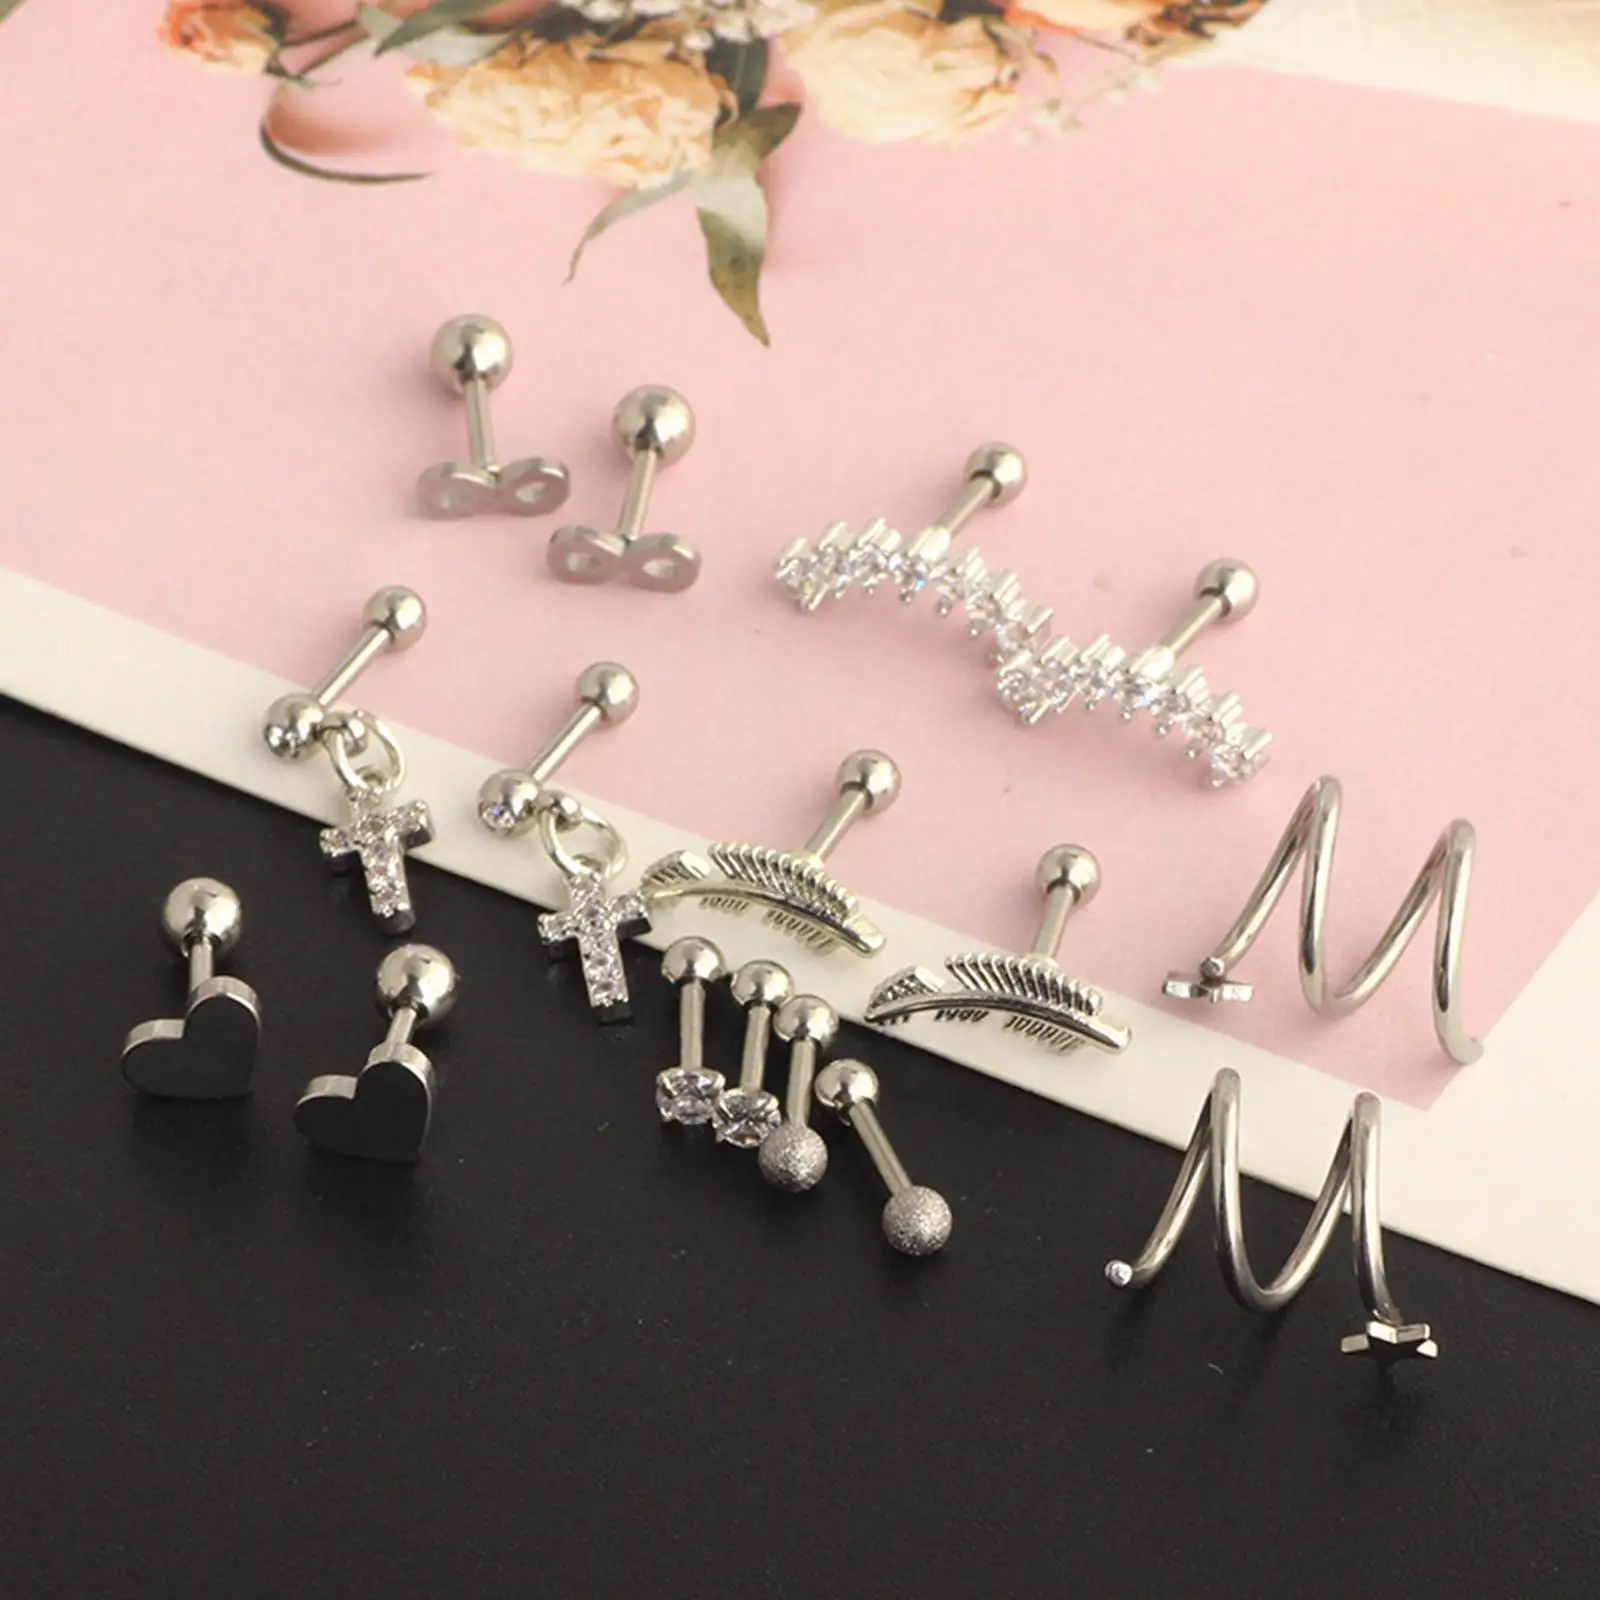 16 Pieces Stainless Steel Earrings Set,  Pendants, for , Heart Ball Feather  Jewelry Nose Rings Barbell Stud Gifts